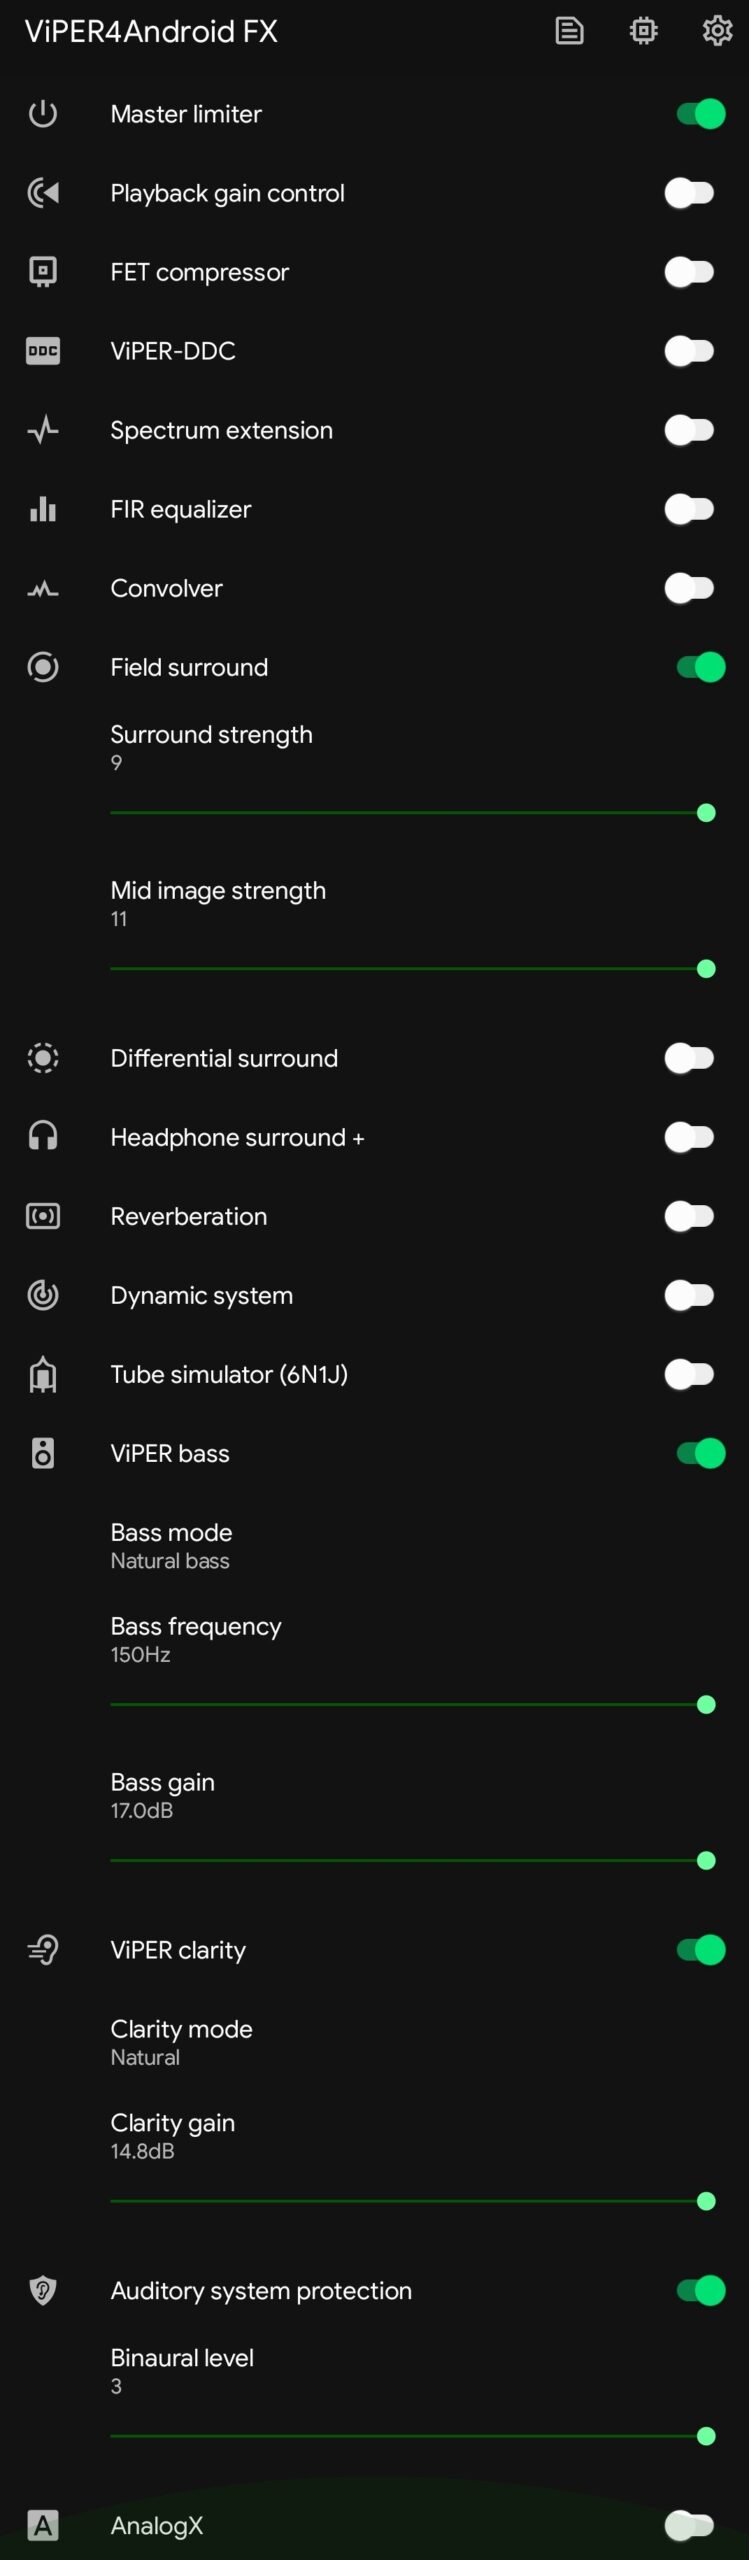 viper4android best settings image